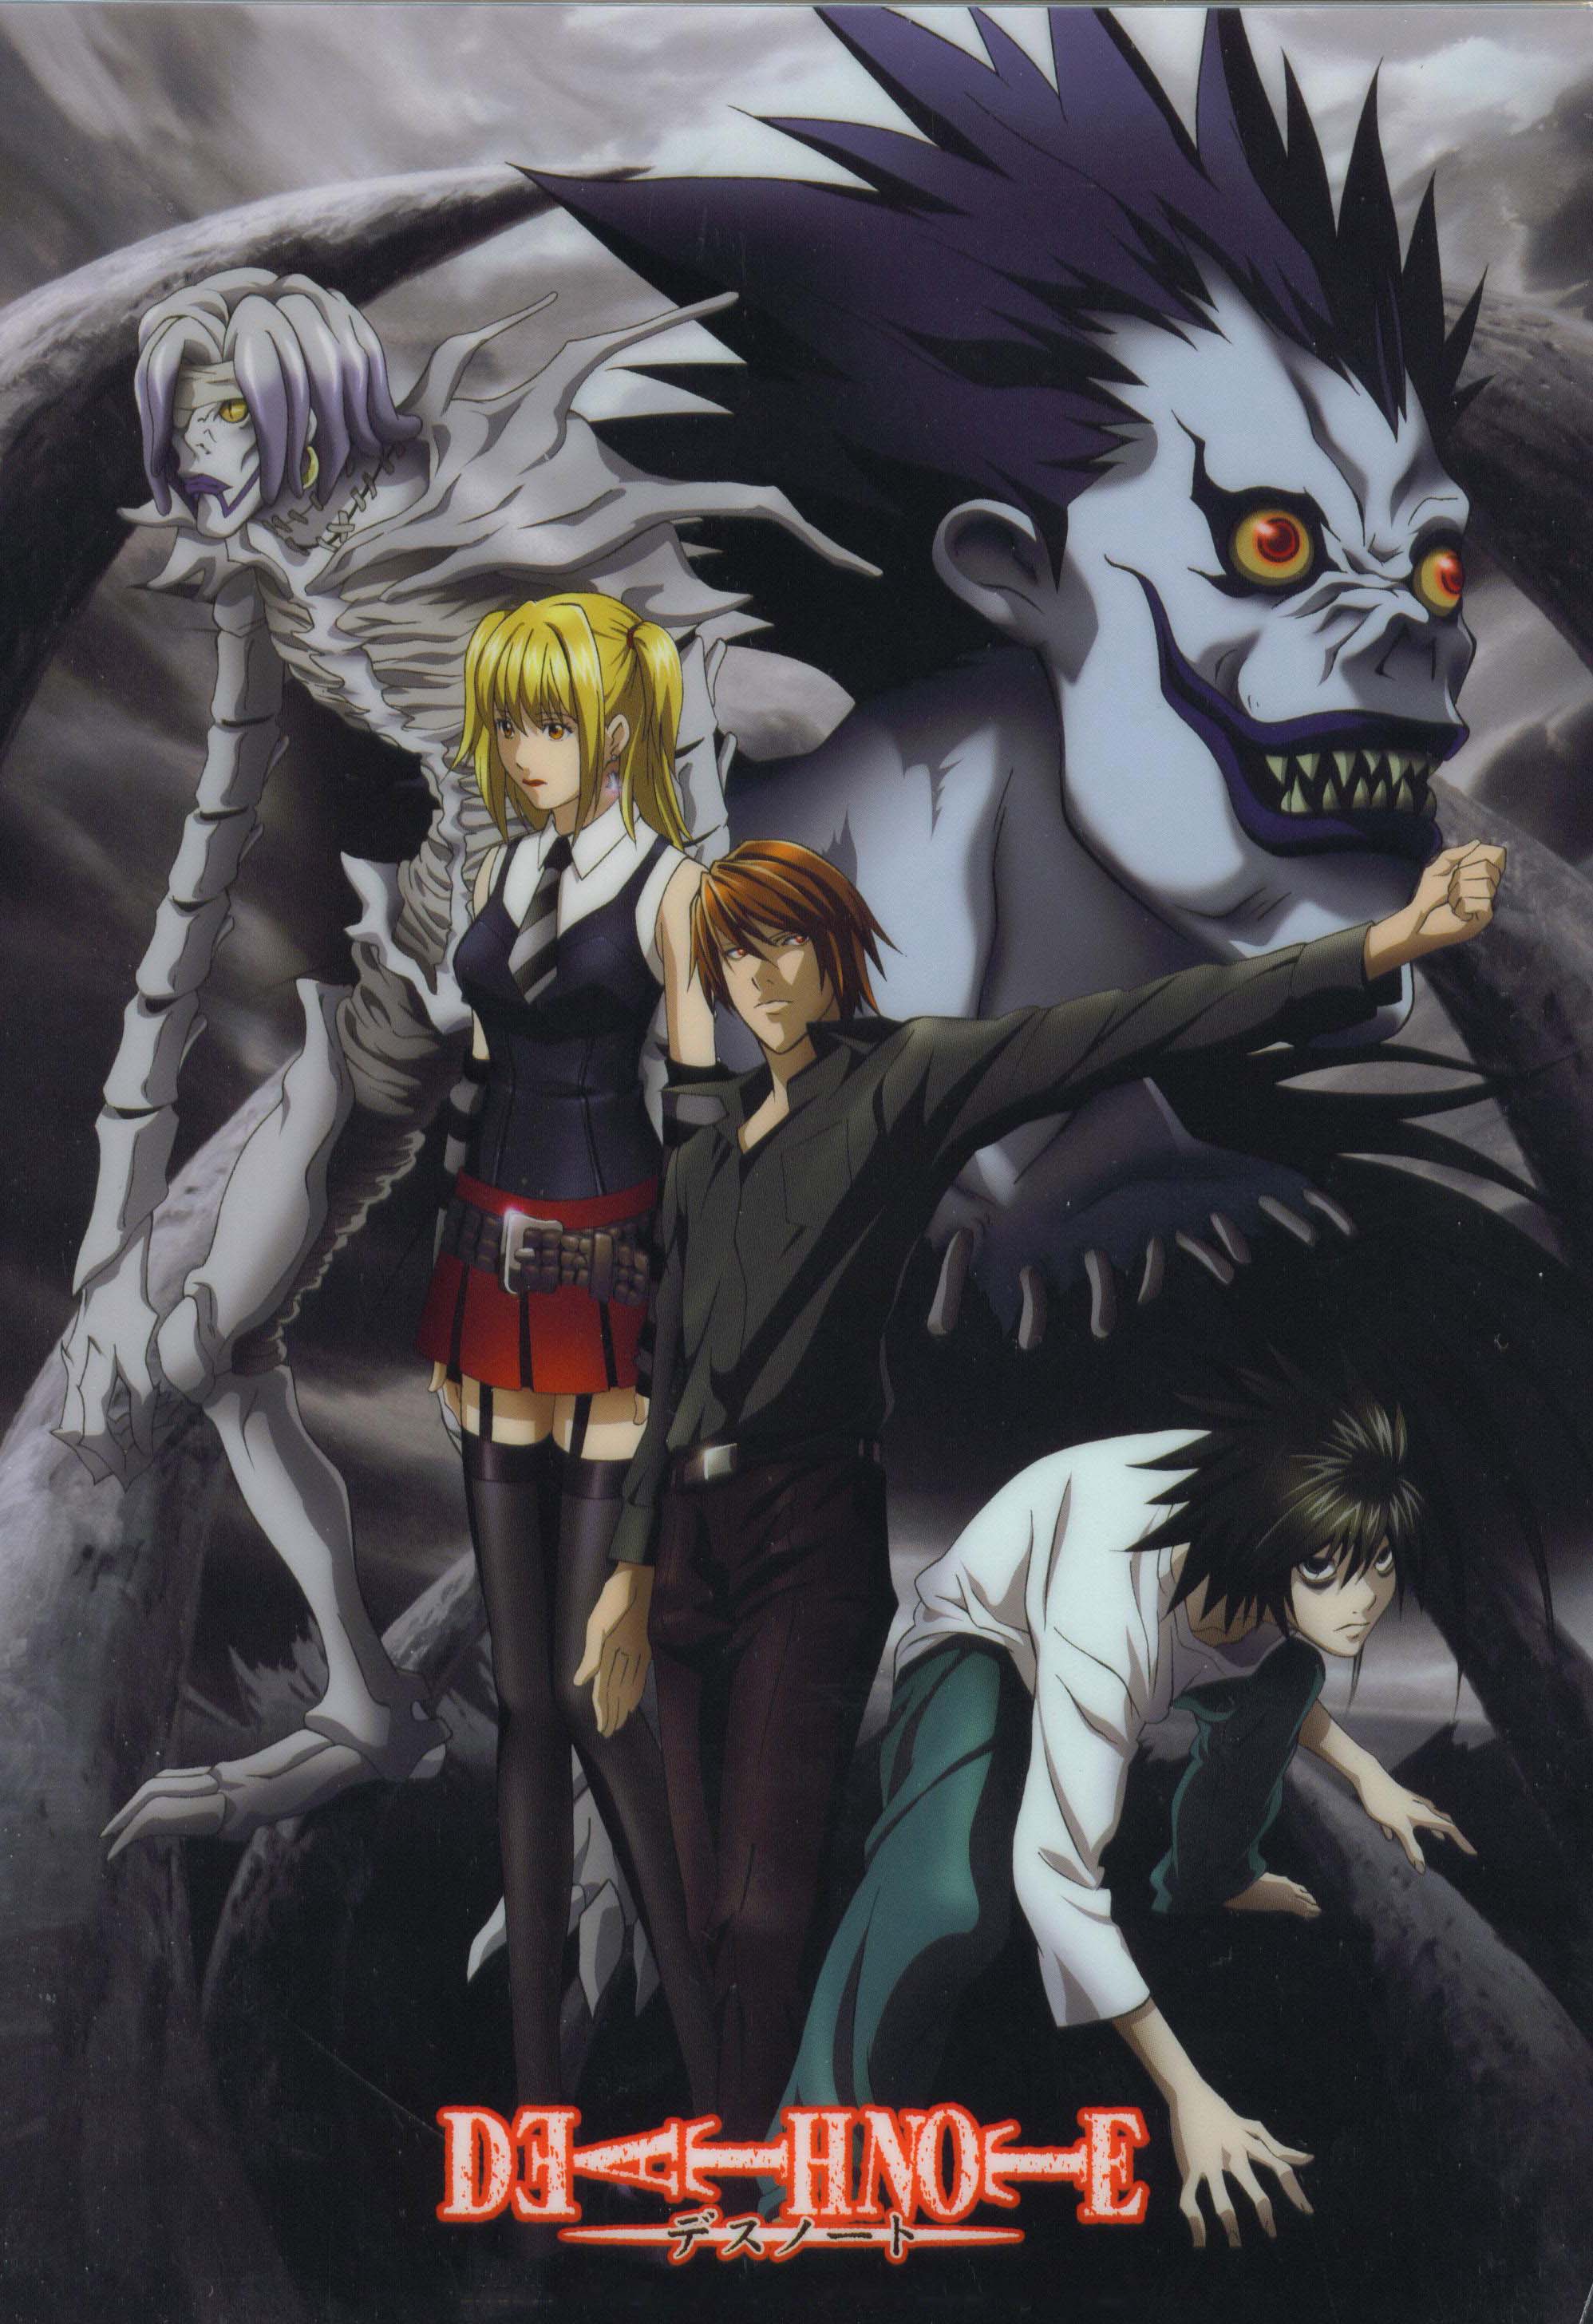 10 Anime Like Death Note You Should Watch - Cultured Vultures